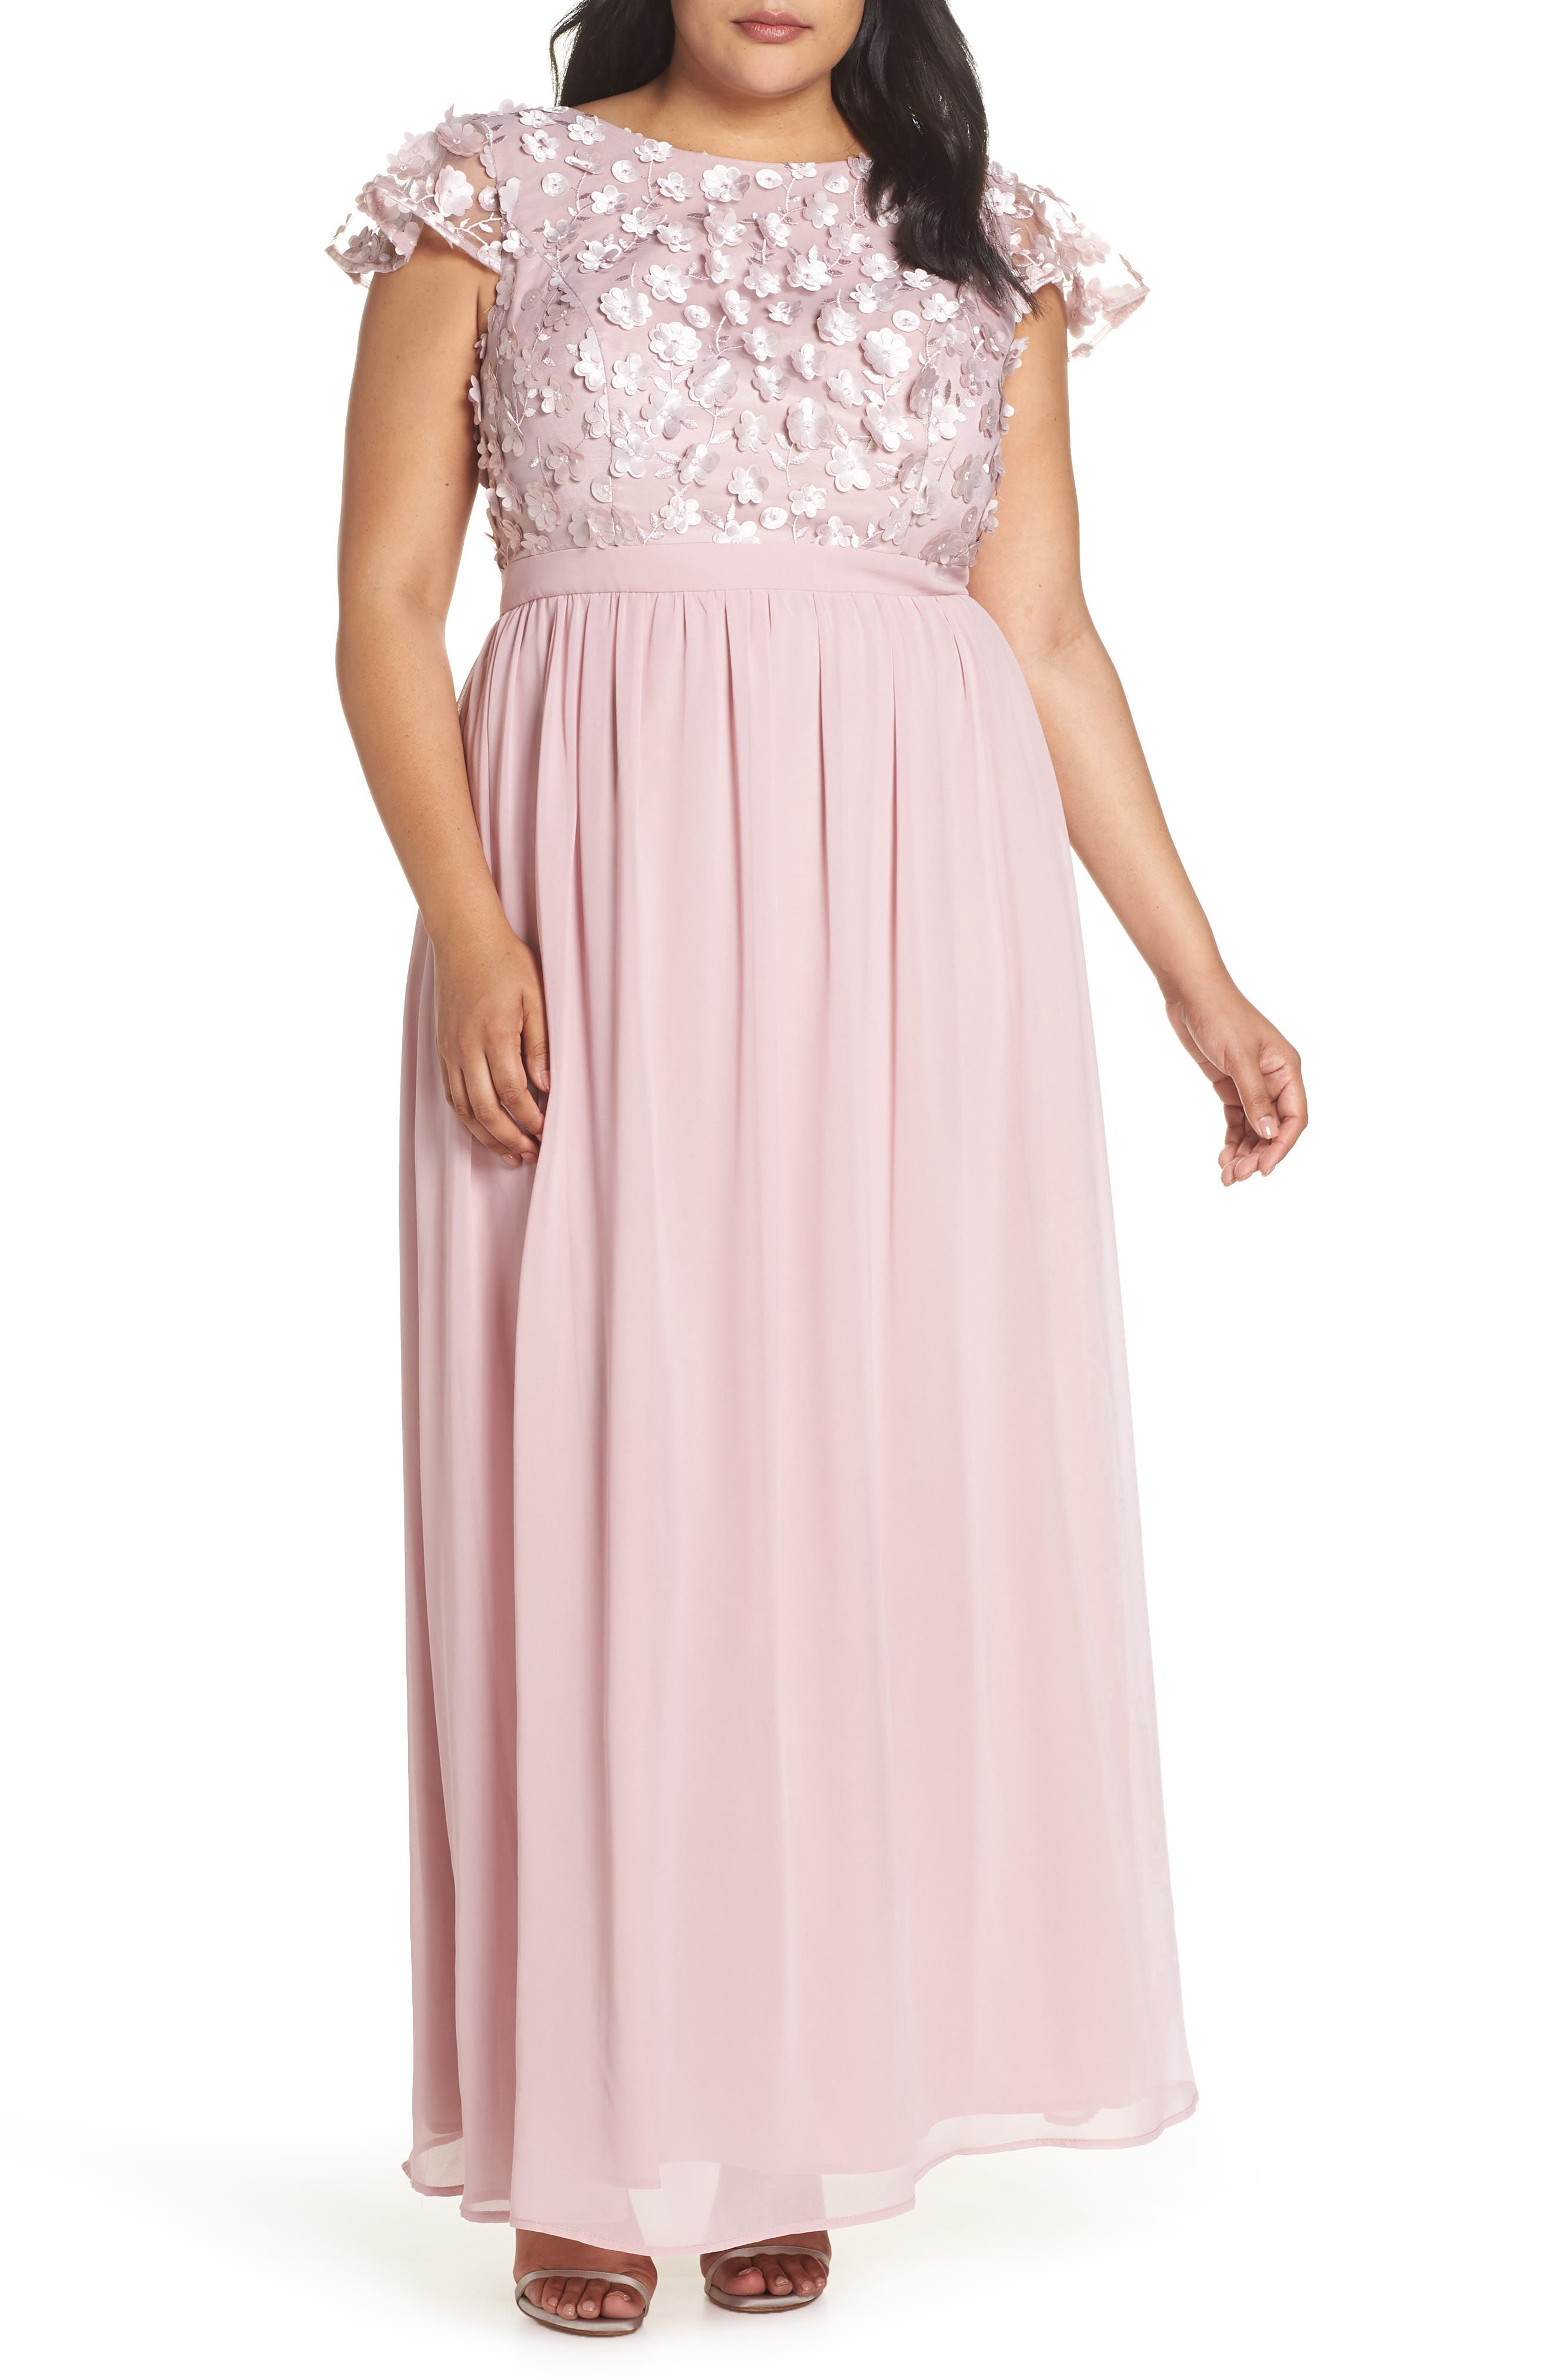 Vintage Inspired Evening Dresses, Gowns and Formal Wear